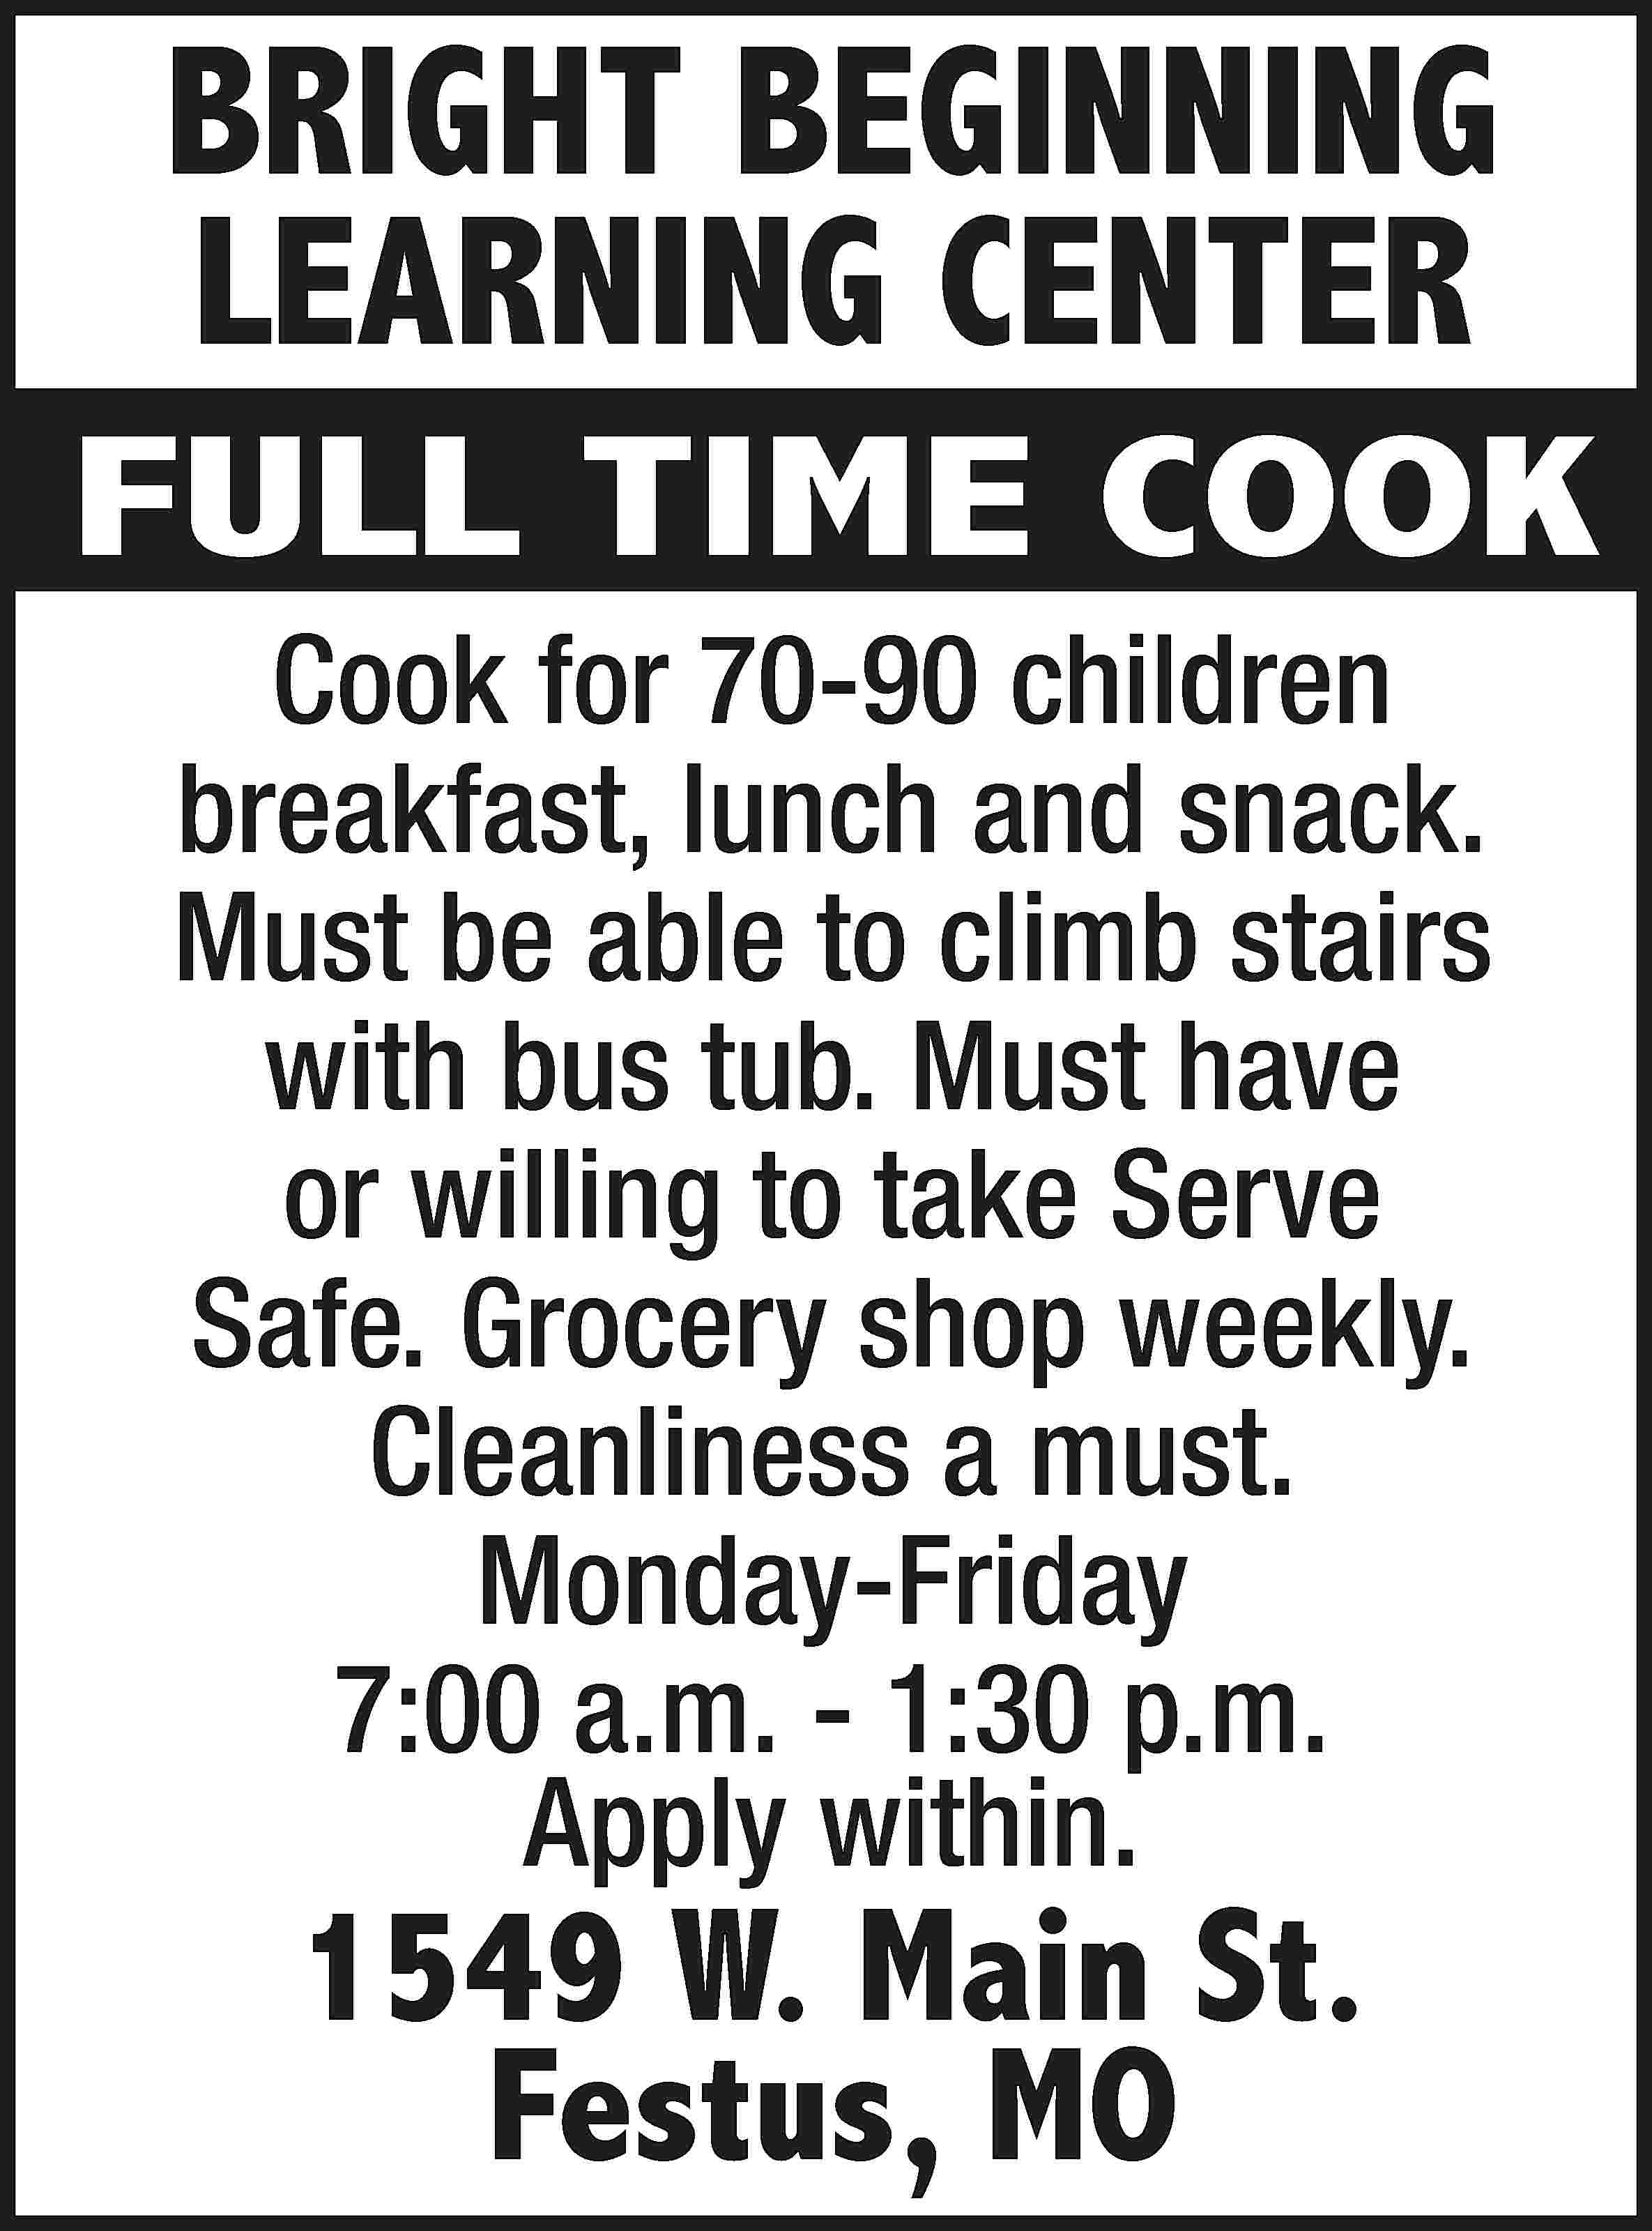 BRIGHT BEGINNING LEARNING CENTER FULL  BRIGHT BEGINNING LEARNING CENTER FULL TIME COOK Cook for 70-90 children breakfast, lunch and snack. Must be able to climb stairs with bus tub. Must have or willing to take Serve Safe. Grocery shop weekly. Cleanliness a must. Monday-Friday 7:00 a.m. - 1:30 p.m. Apply within. 1549 W. Main St. Festus, MO